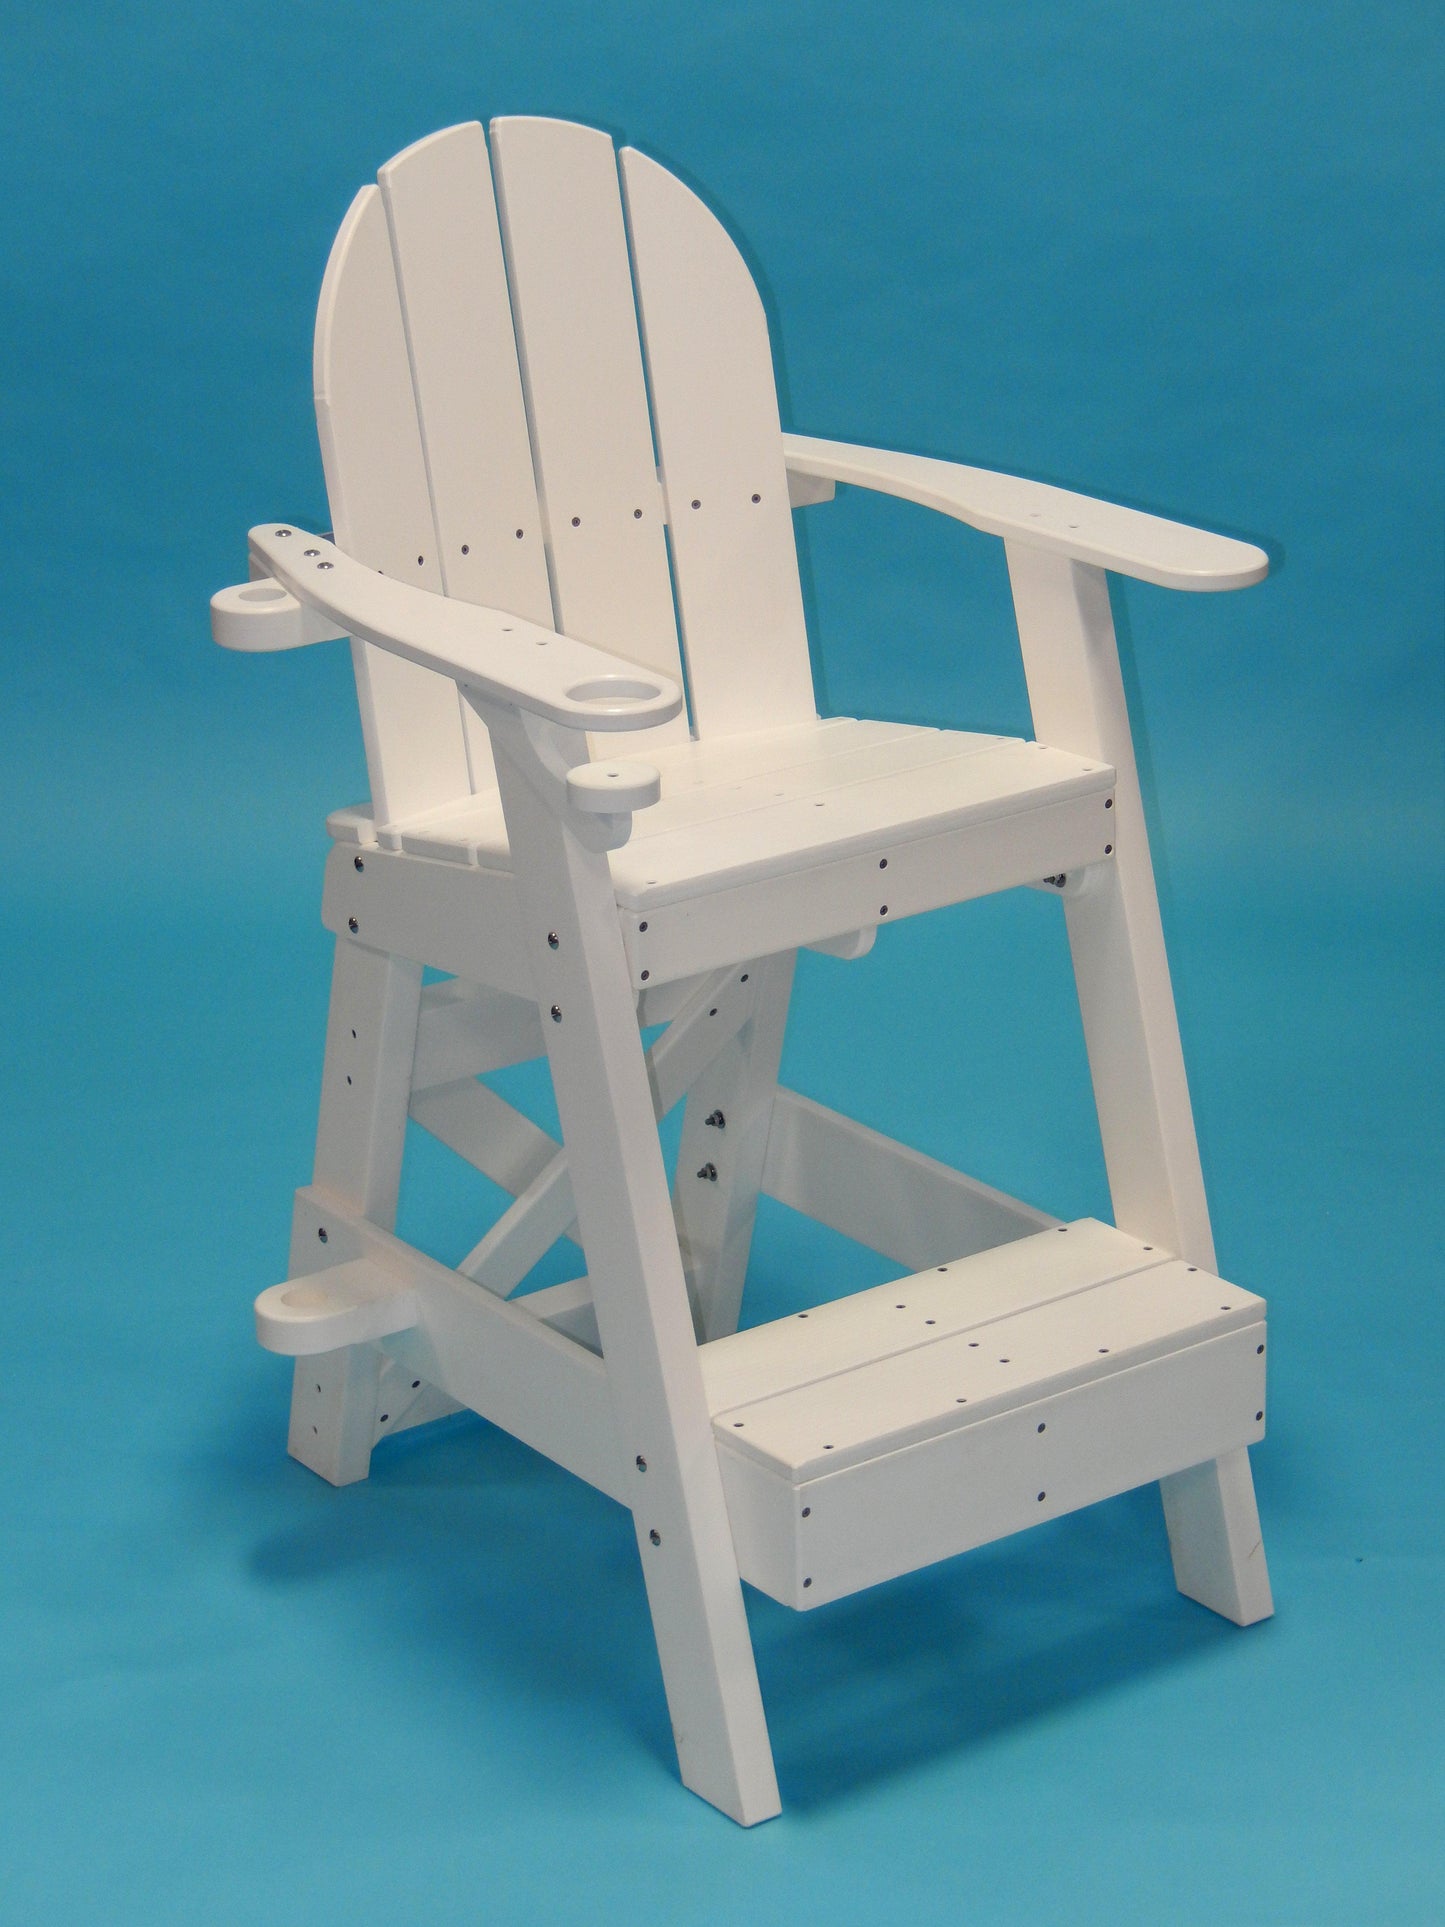 Tailwind Furniture Recycled Plastic Small Lifeguard Chair - LG-505 - Seat Height 30" - LEAD TIME TO SHIP 10 TO 12 BUSINESS DAYS